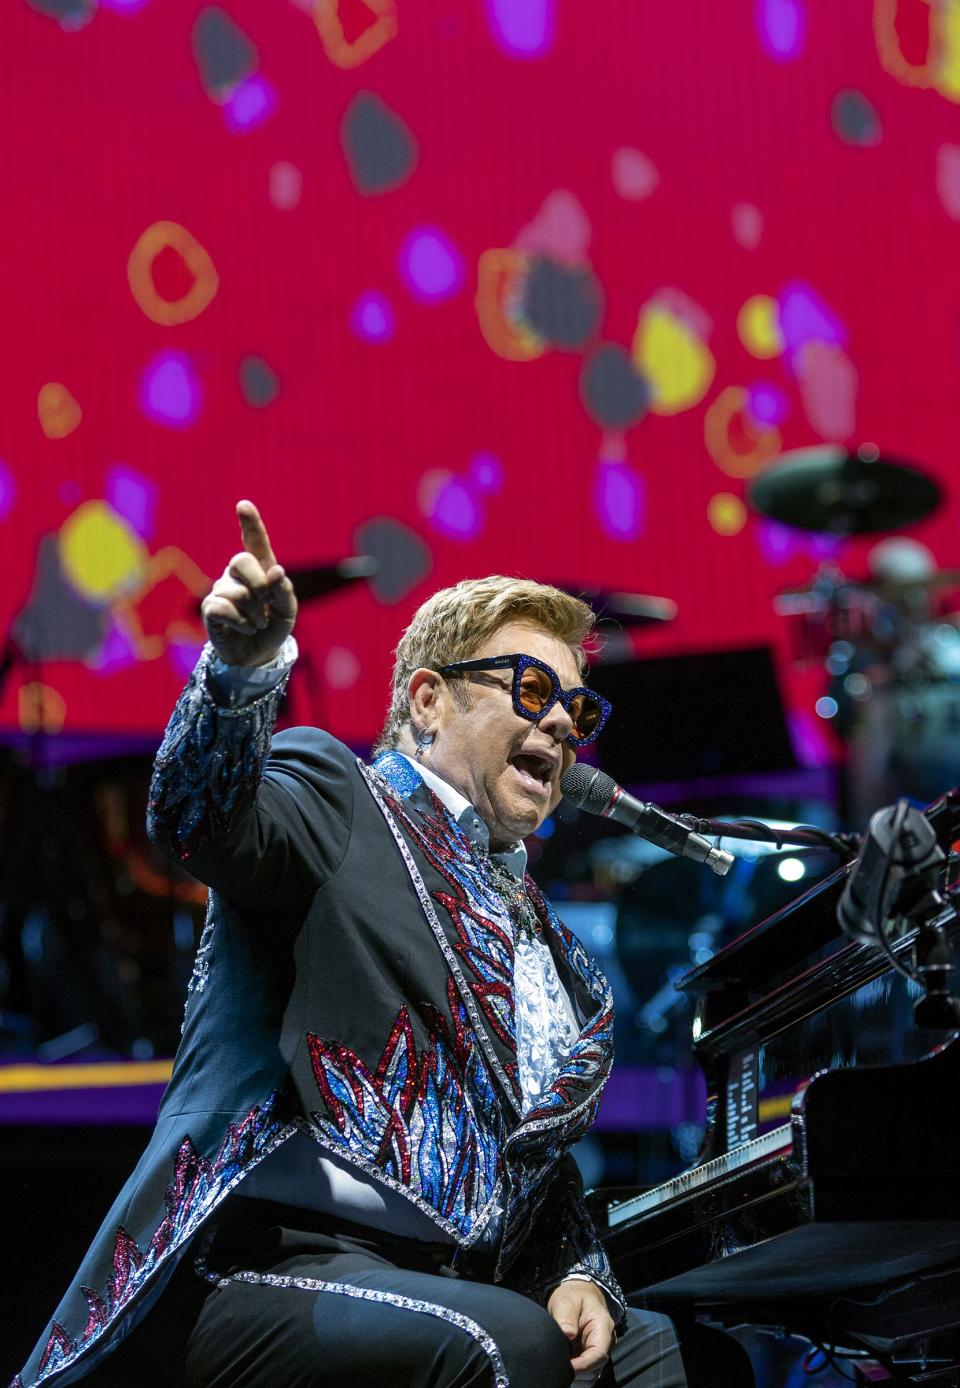 Elton John gestures out at the audience as he performs at Vivint Arena in Salt Lake City on Wednesday, Sept. 4, 2019. | Scott G Winterton, Deseret News